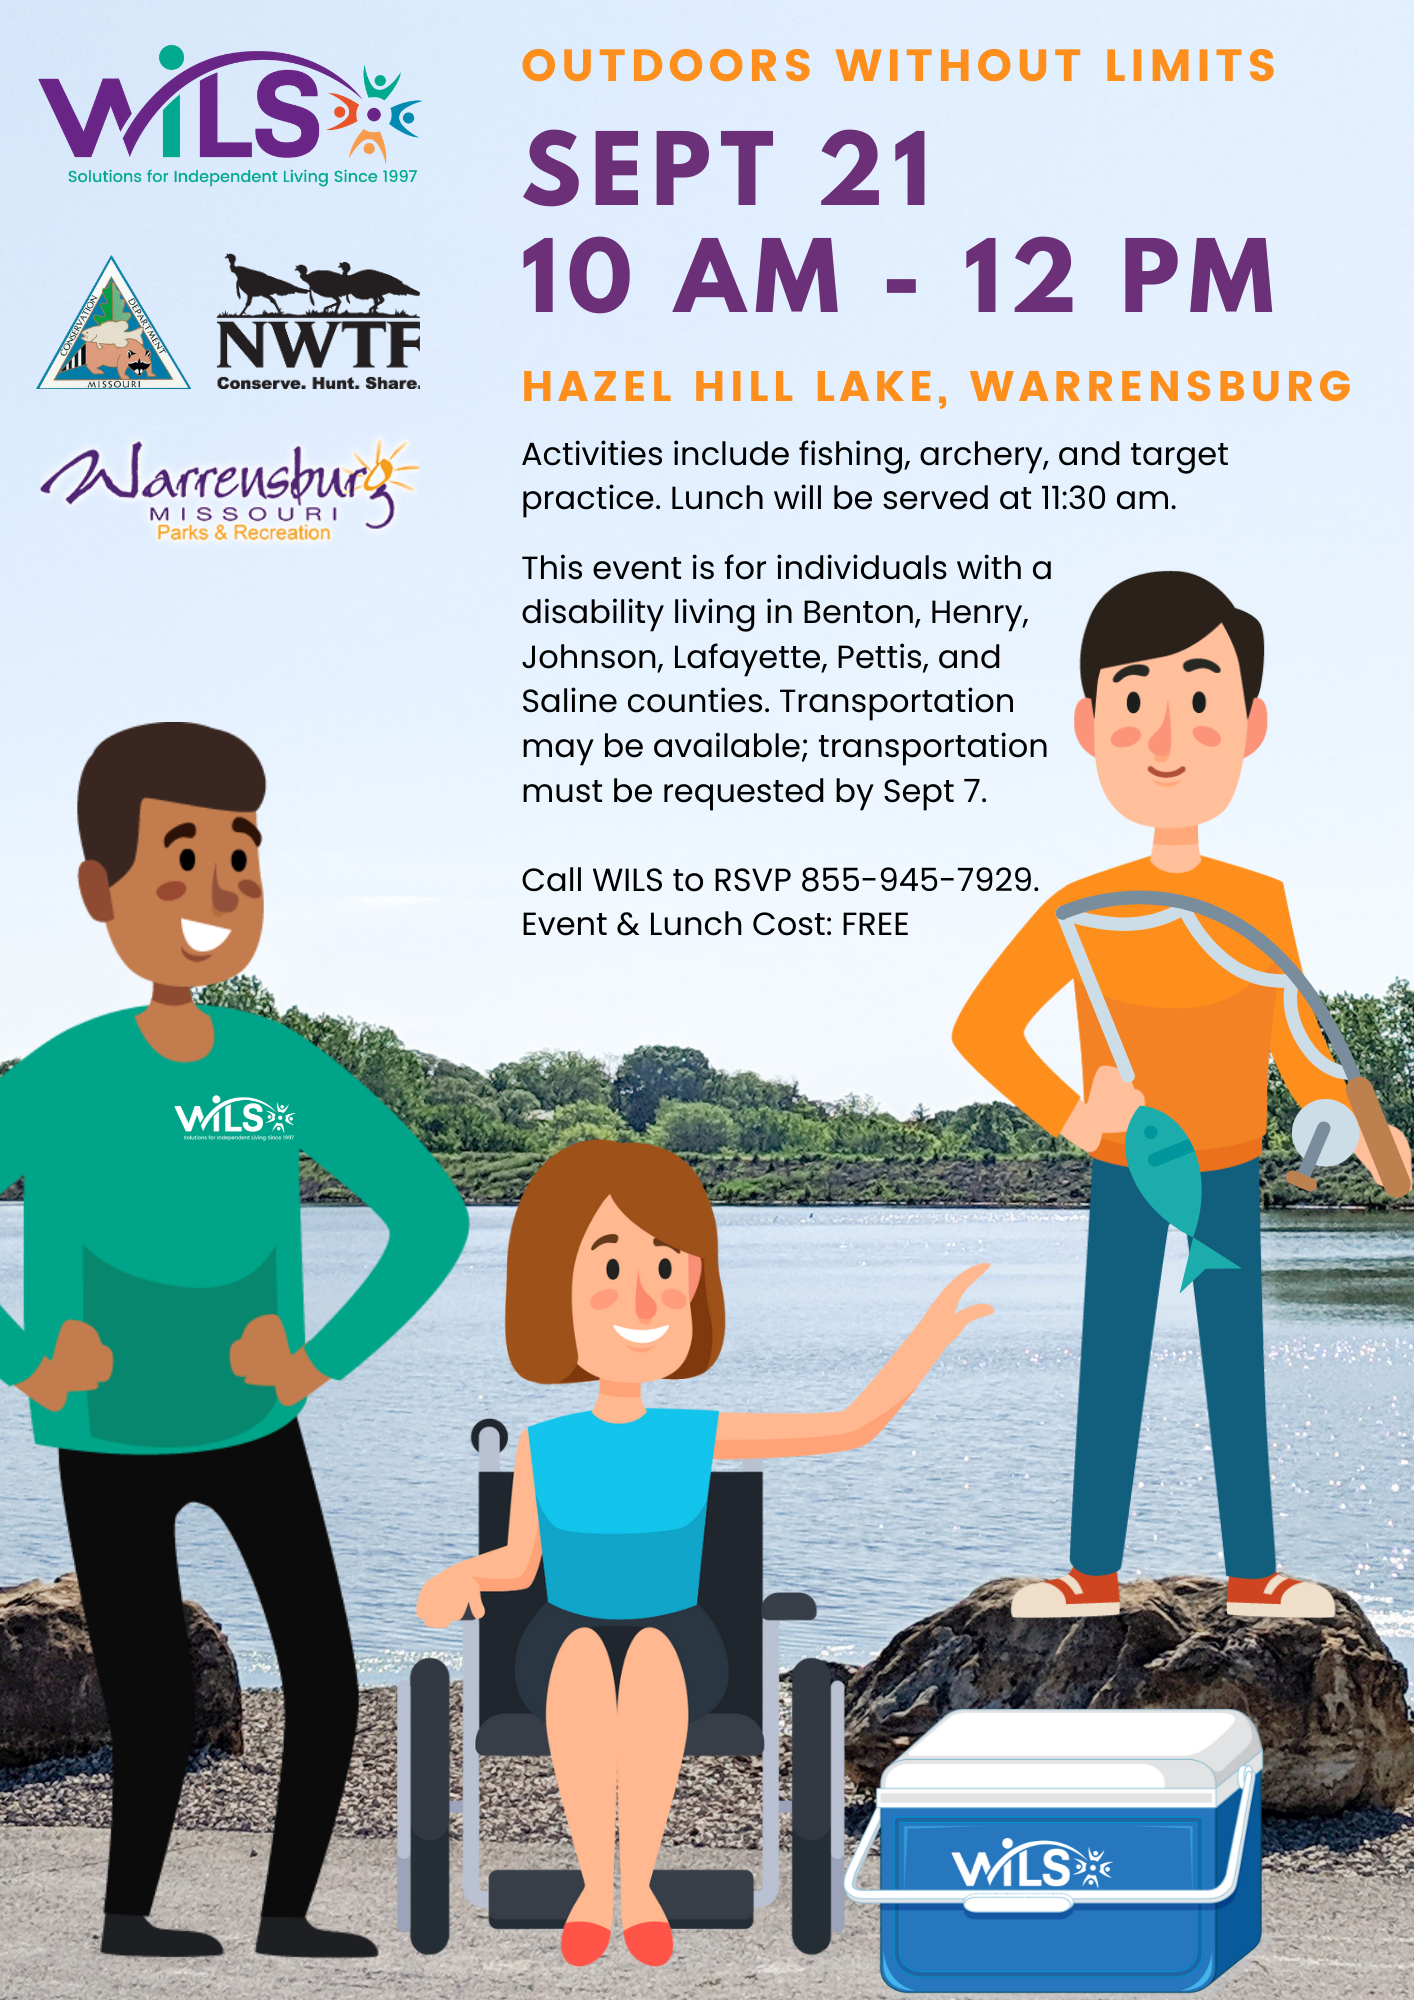 Fall Outdoors Without Limits Sept 21, 10am - 12pm at Hazel Hill Lake. This event is for individuals with a disability living in Benton, Henry, Johnson, Lafayette, Pettis, and Saline counties. Transportation may be available; transportation must be requested by Sept 7.  Call WILS to RSVP 855-945-7929. Event & Lunch Cost: FREE